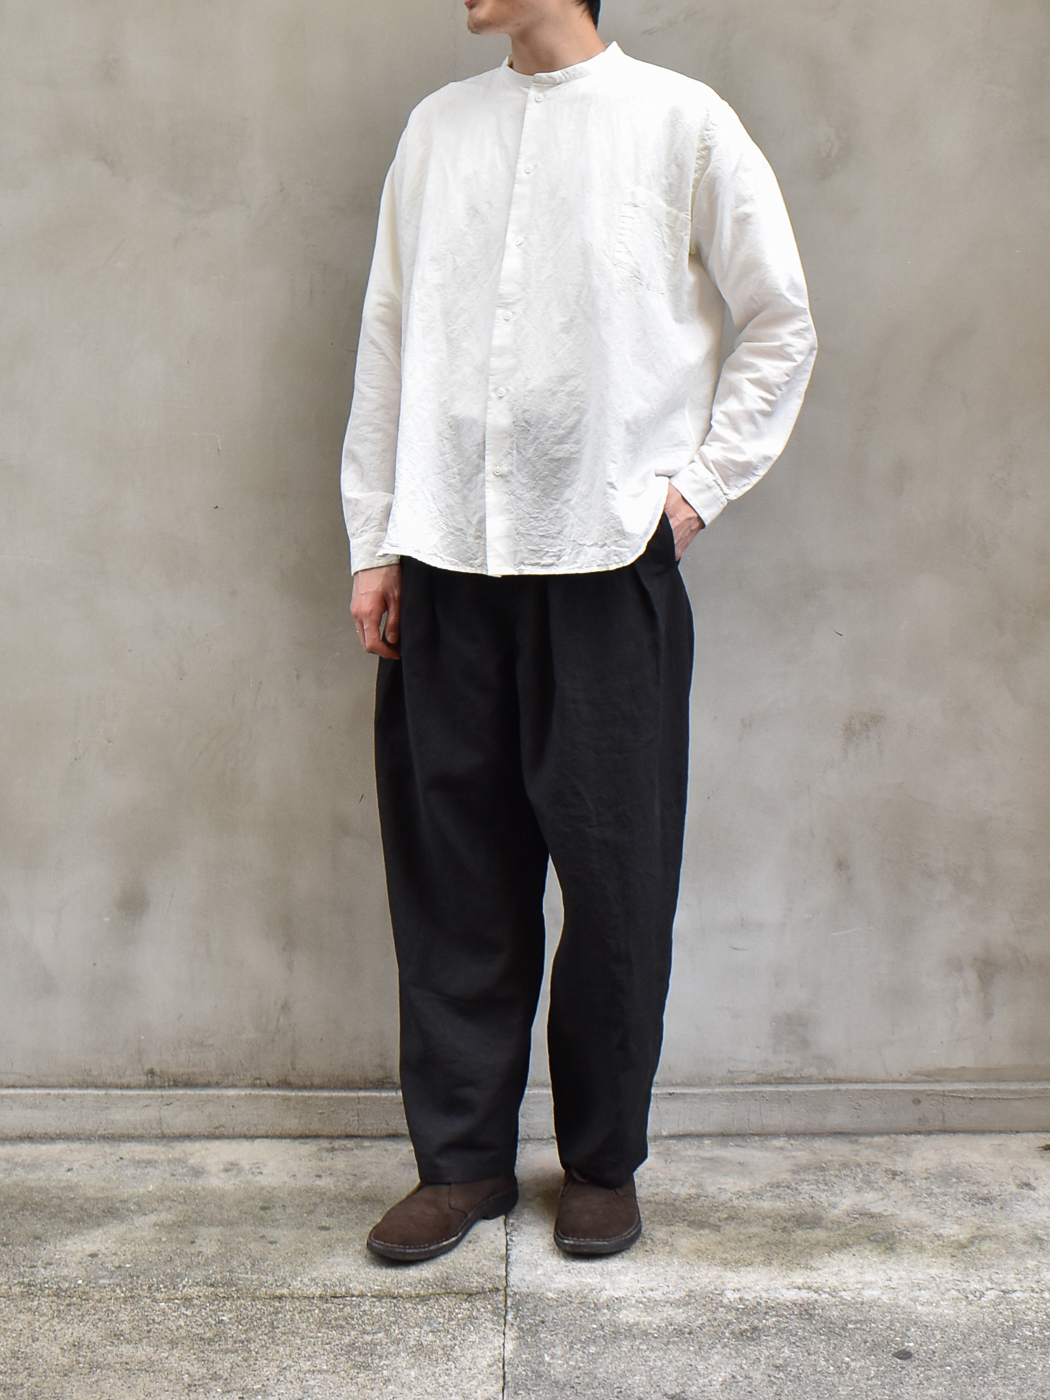 Standcollakaval Stand collar simple shirt シャツ